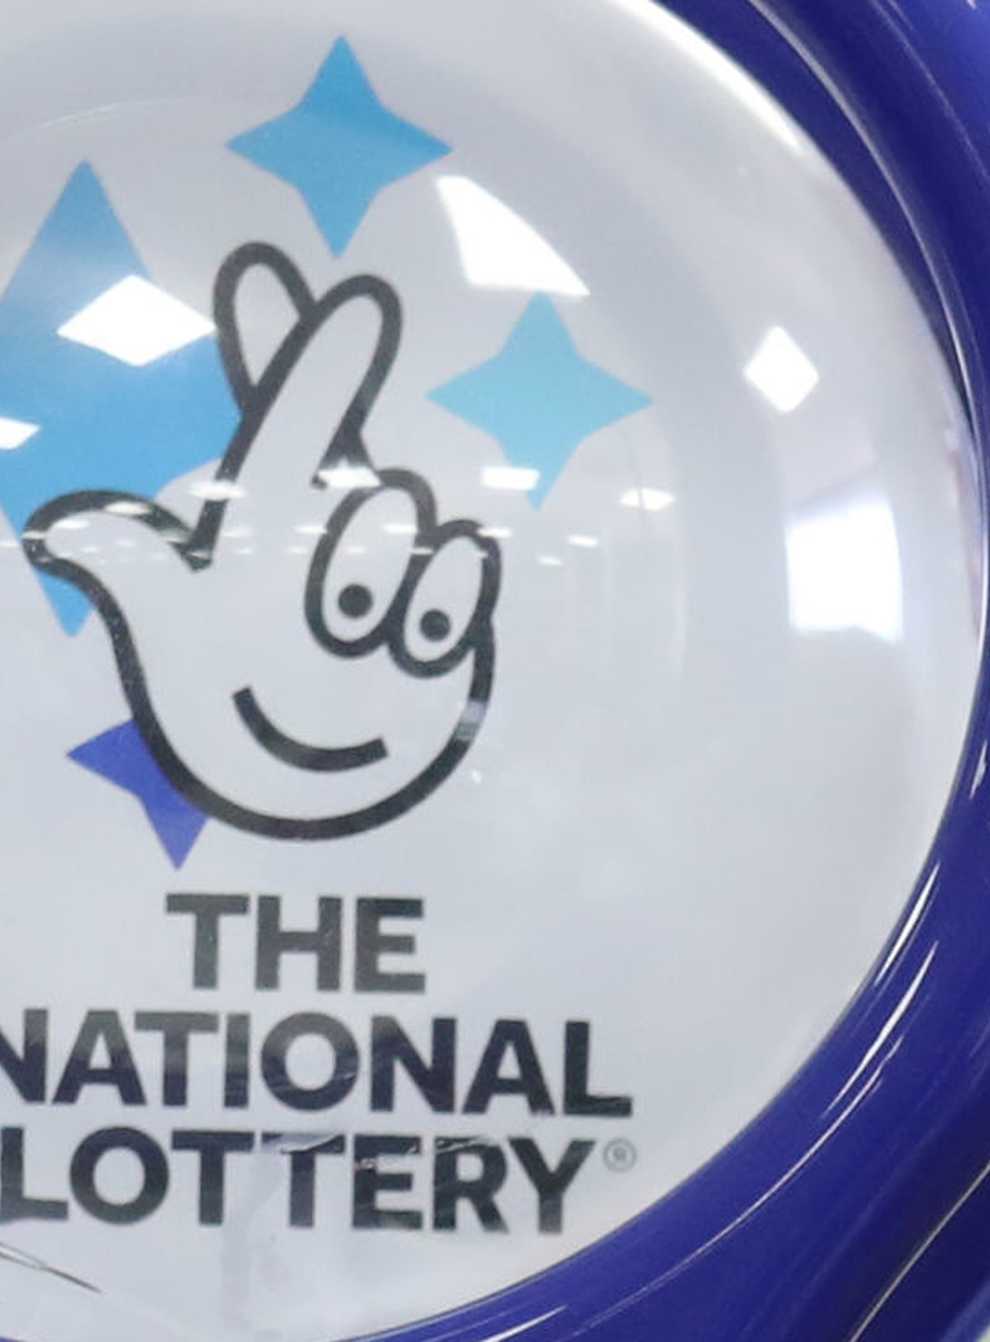 Allwyn has been confirmed as the next licence-holder for the National Lottery after rivals dropped appeals (Andrew Milligan/PA)